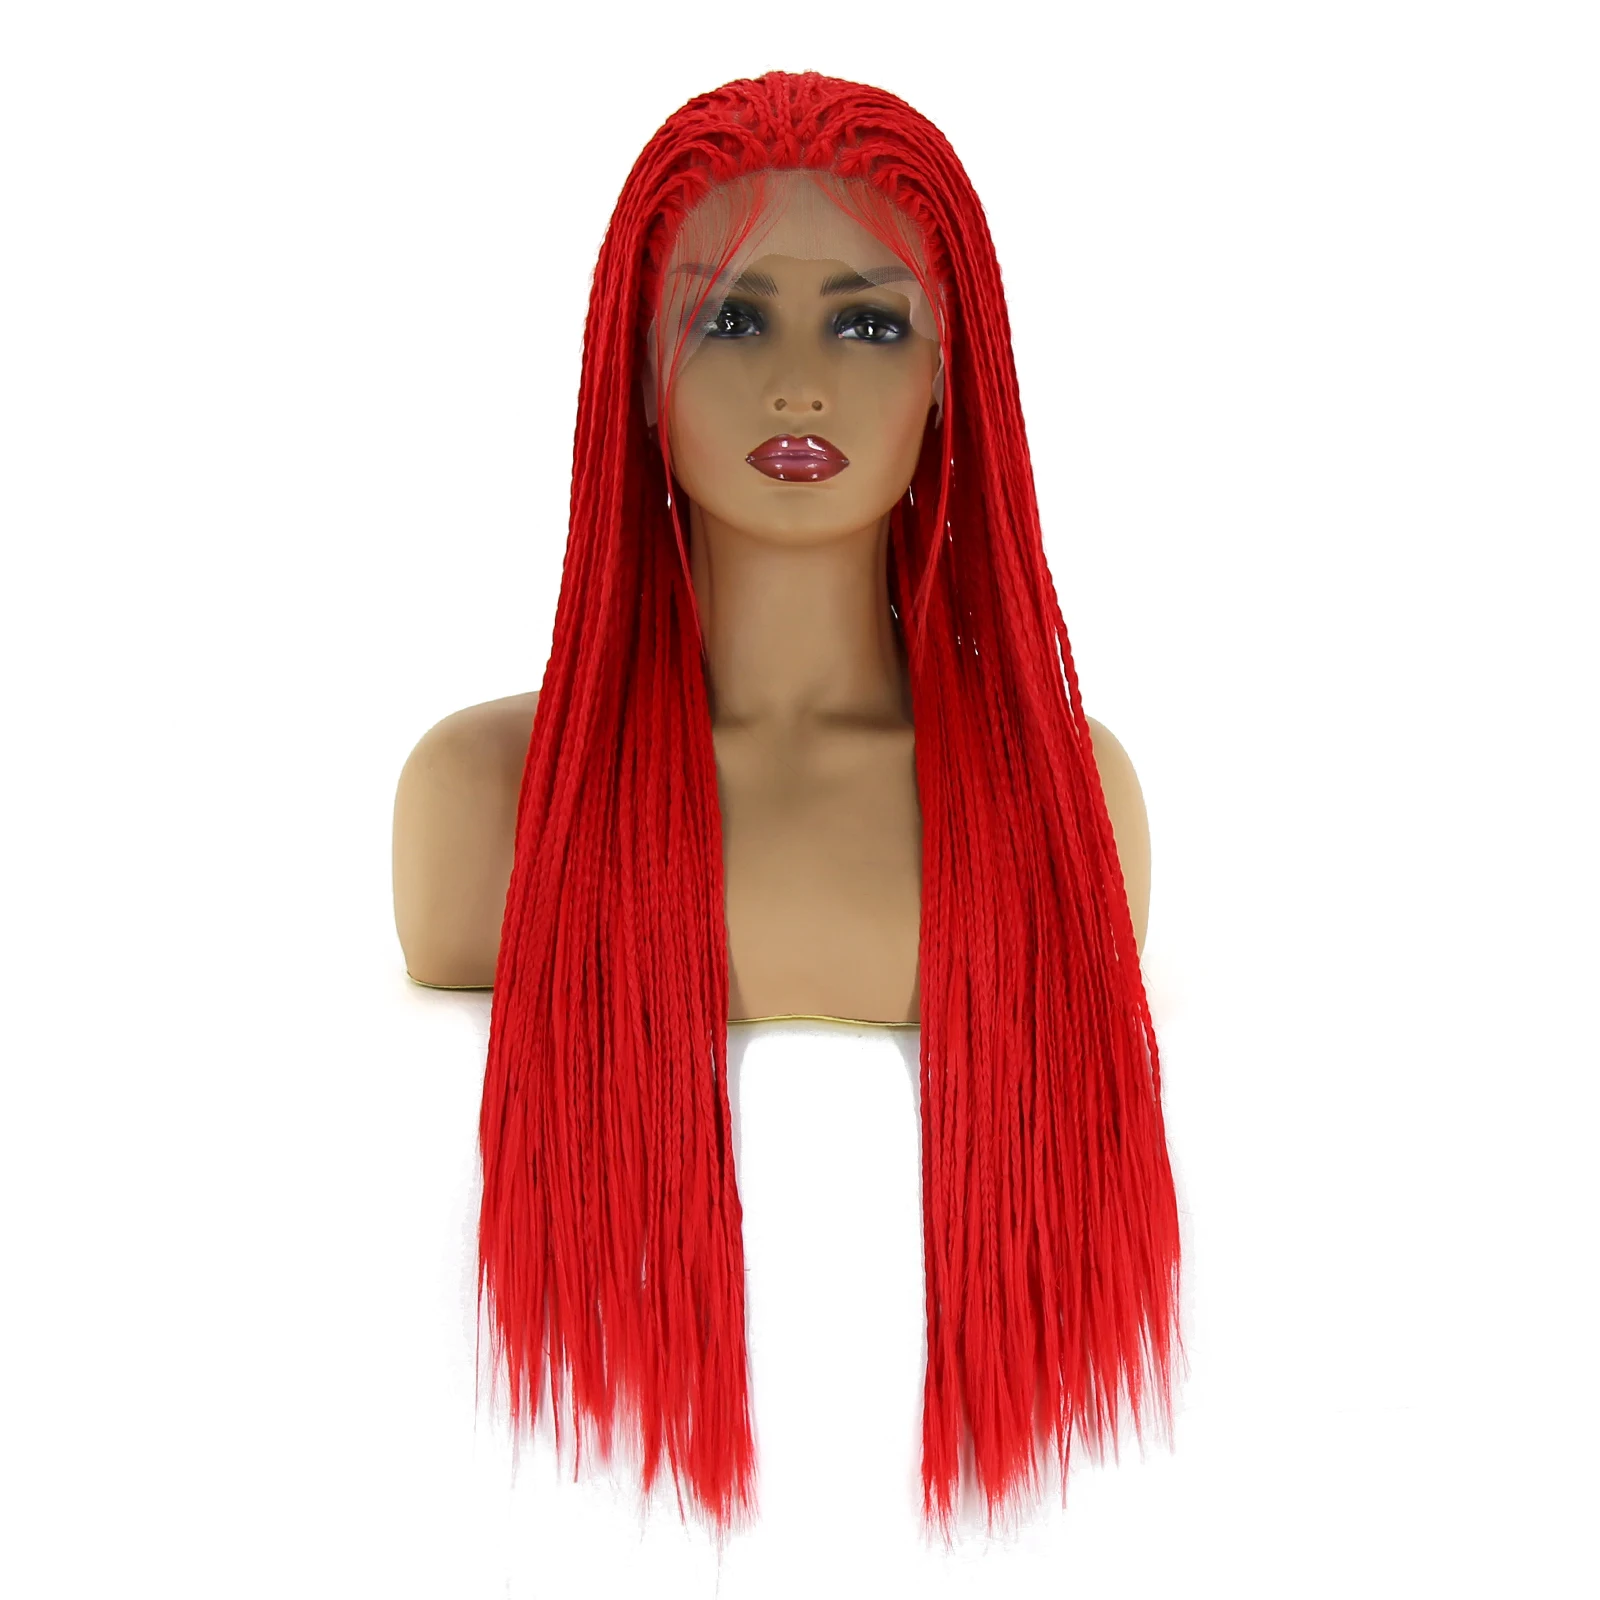 BTWTRY Red Micro Braided Synthetic Lace Front Braid Wigs for Black Women Daily Wear High Temperature Resistance Braided Hair